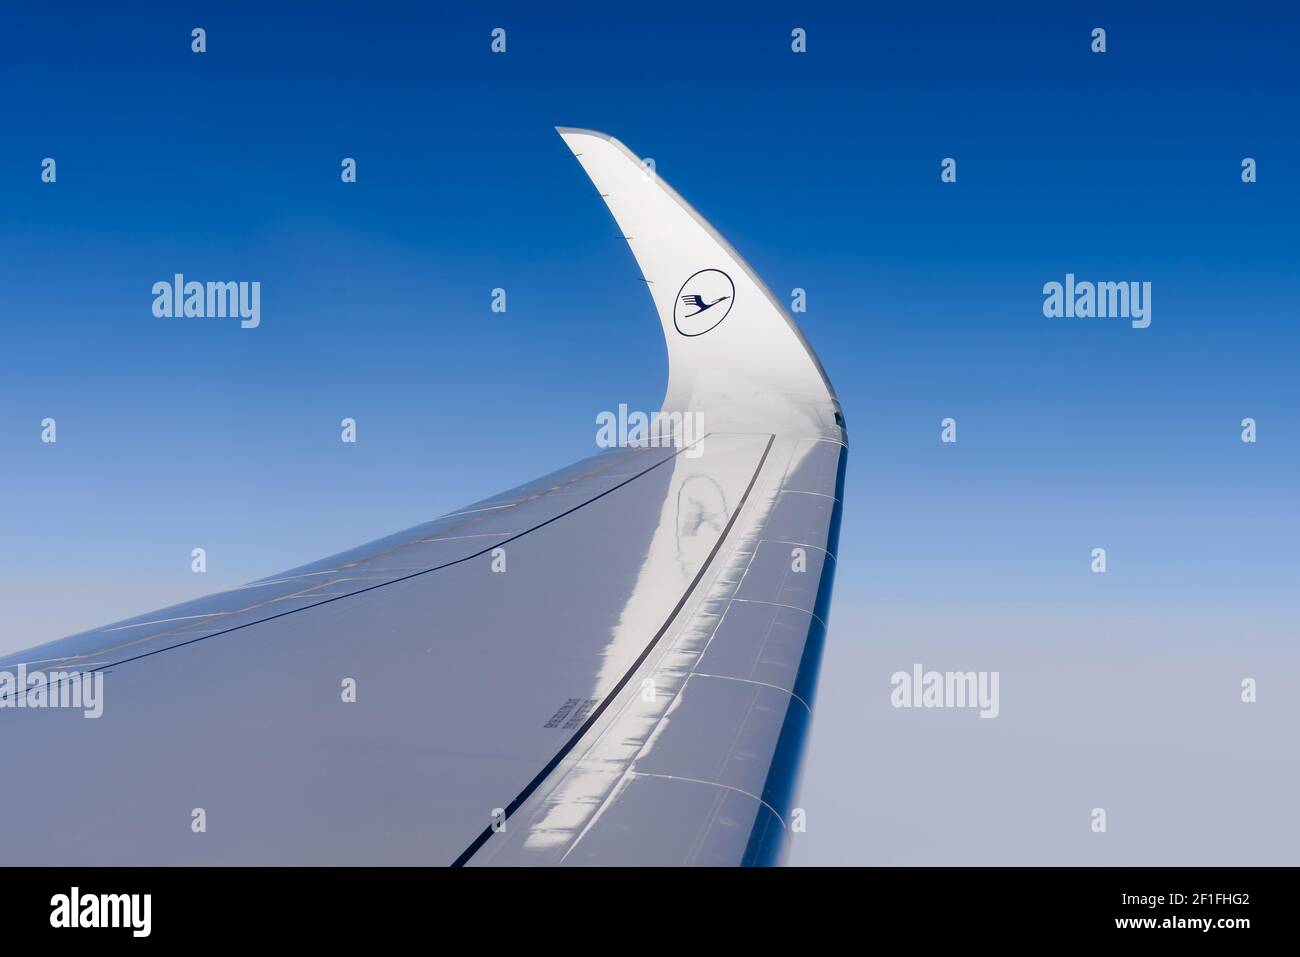 Curved wingtips design of Airbus A350 wing, also know as sharklets. Wingtip of Lufthansa Airlines modern aircraft in flight. Stock Photo